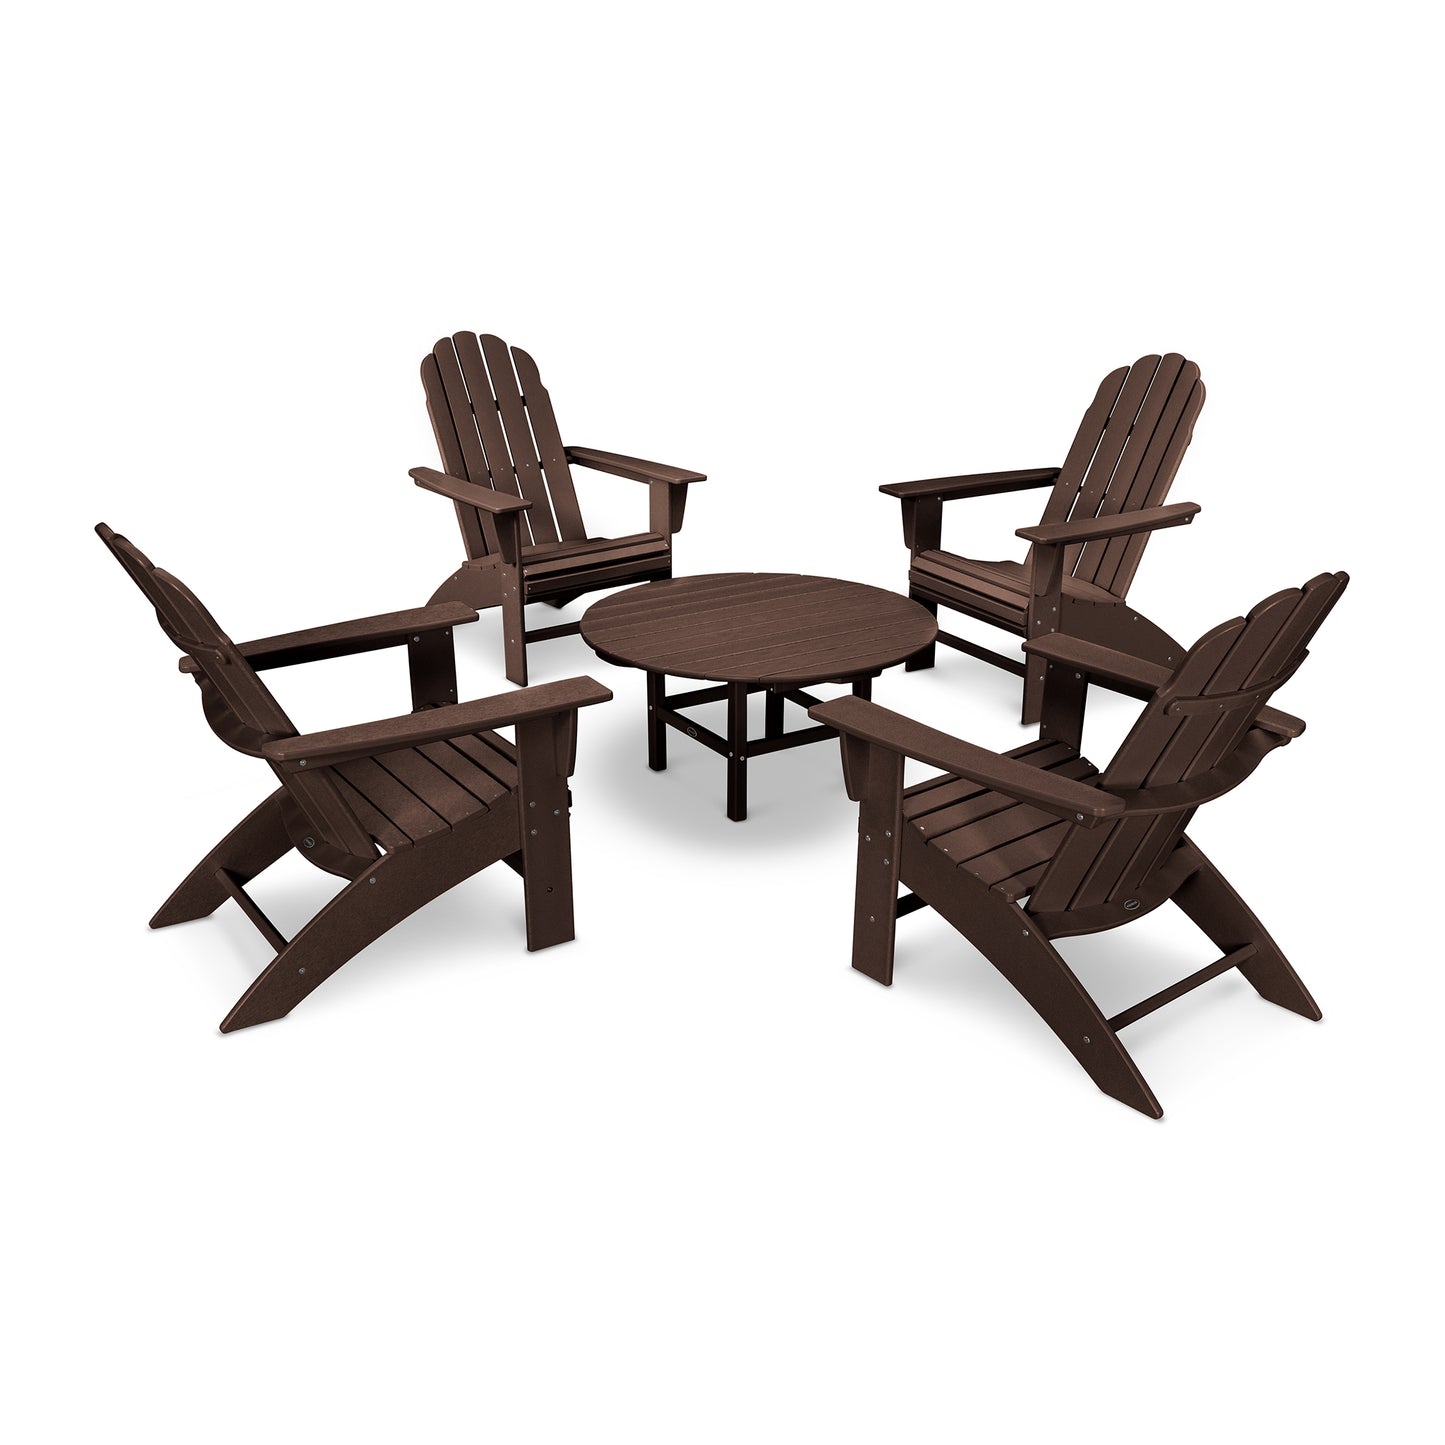 Four brown POLYWOOD Vineyard Adirondack chairs arranged around a matching circular table on a white background. The furniture is made of POLYWOOD lumber, suggesting an outdoor setting.